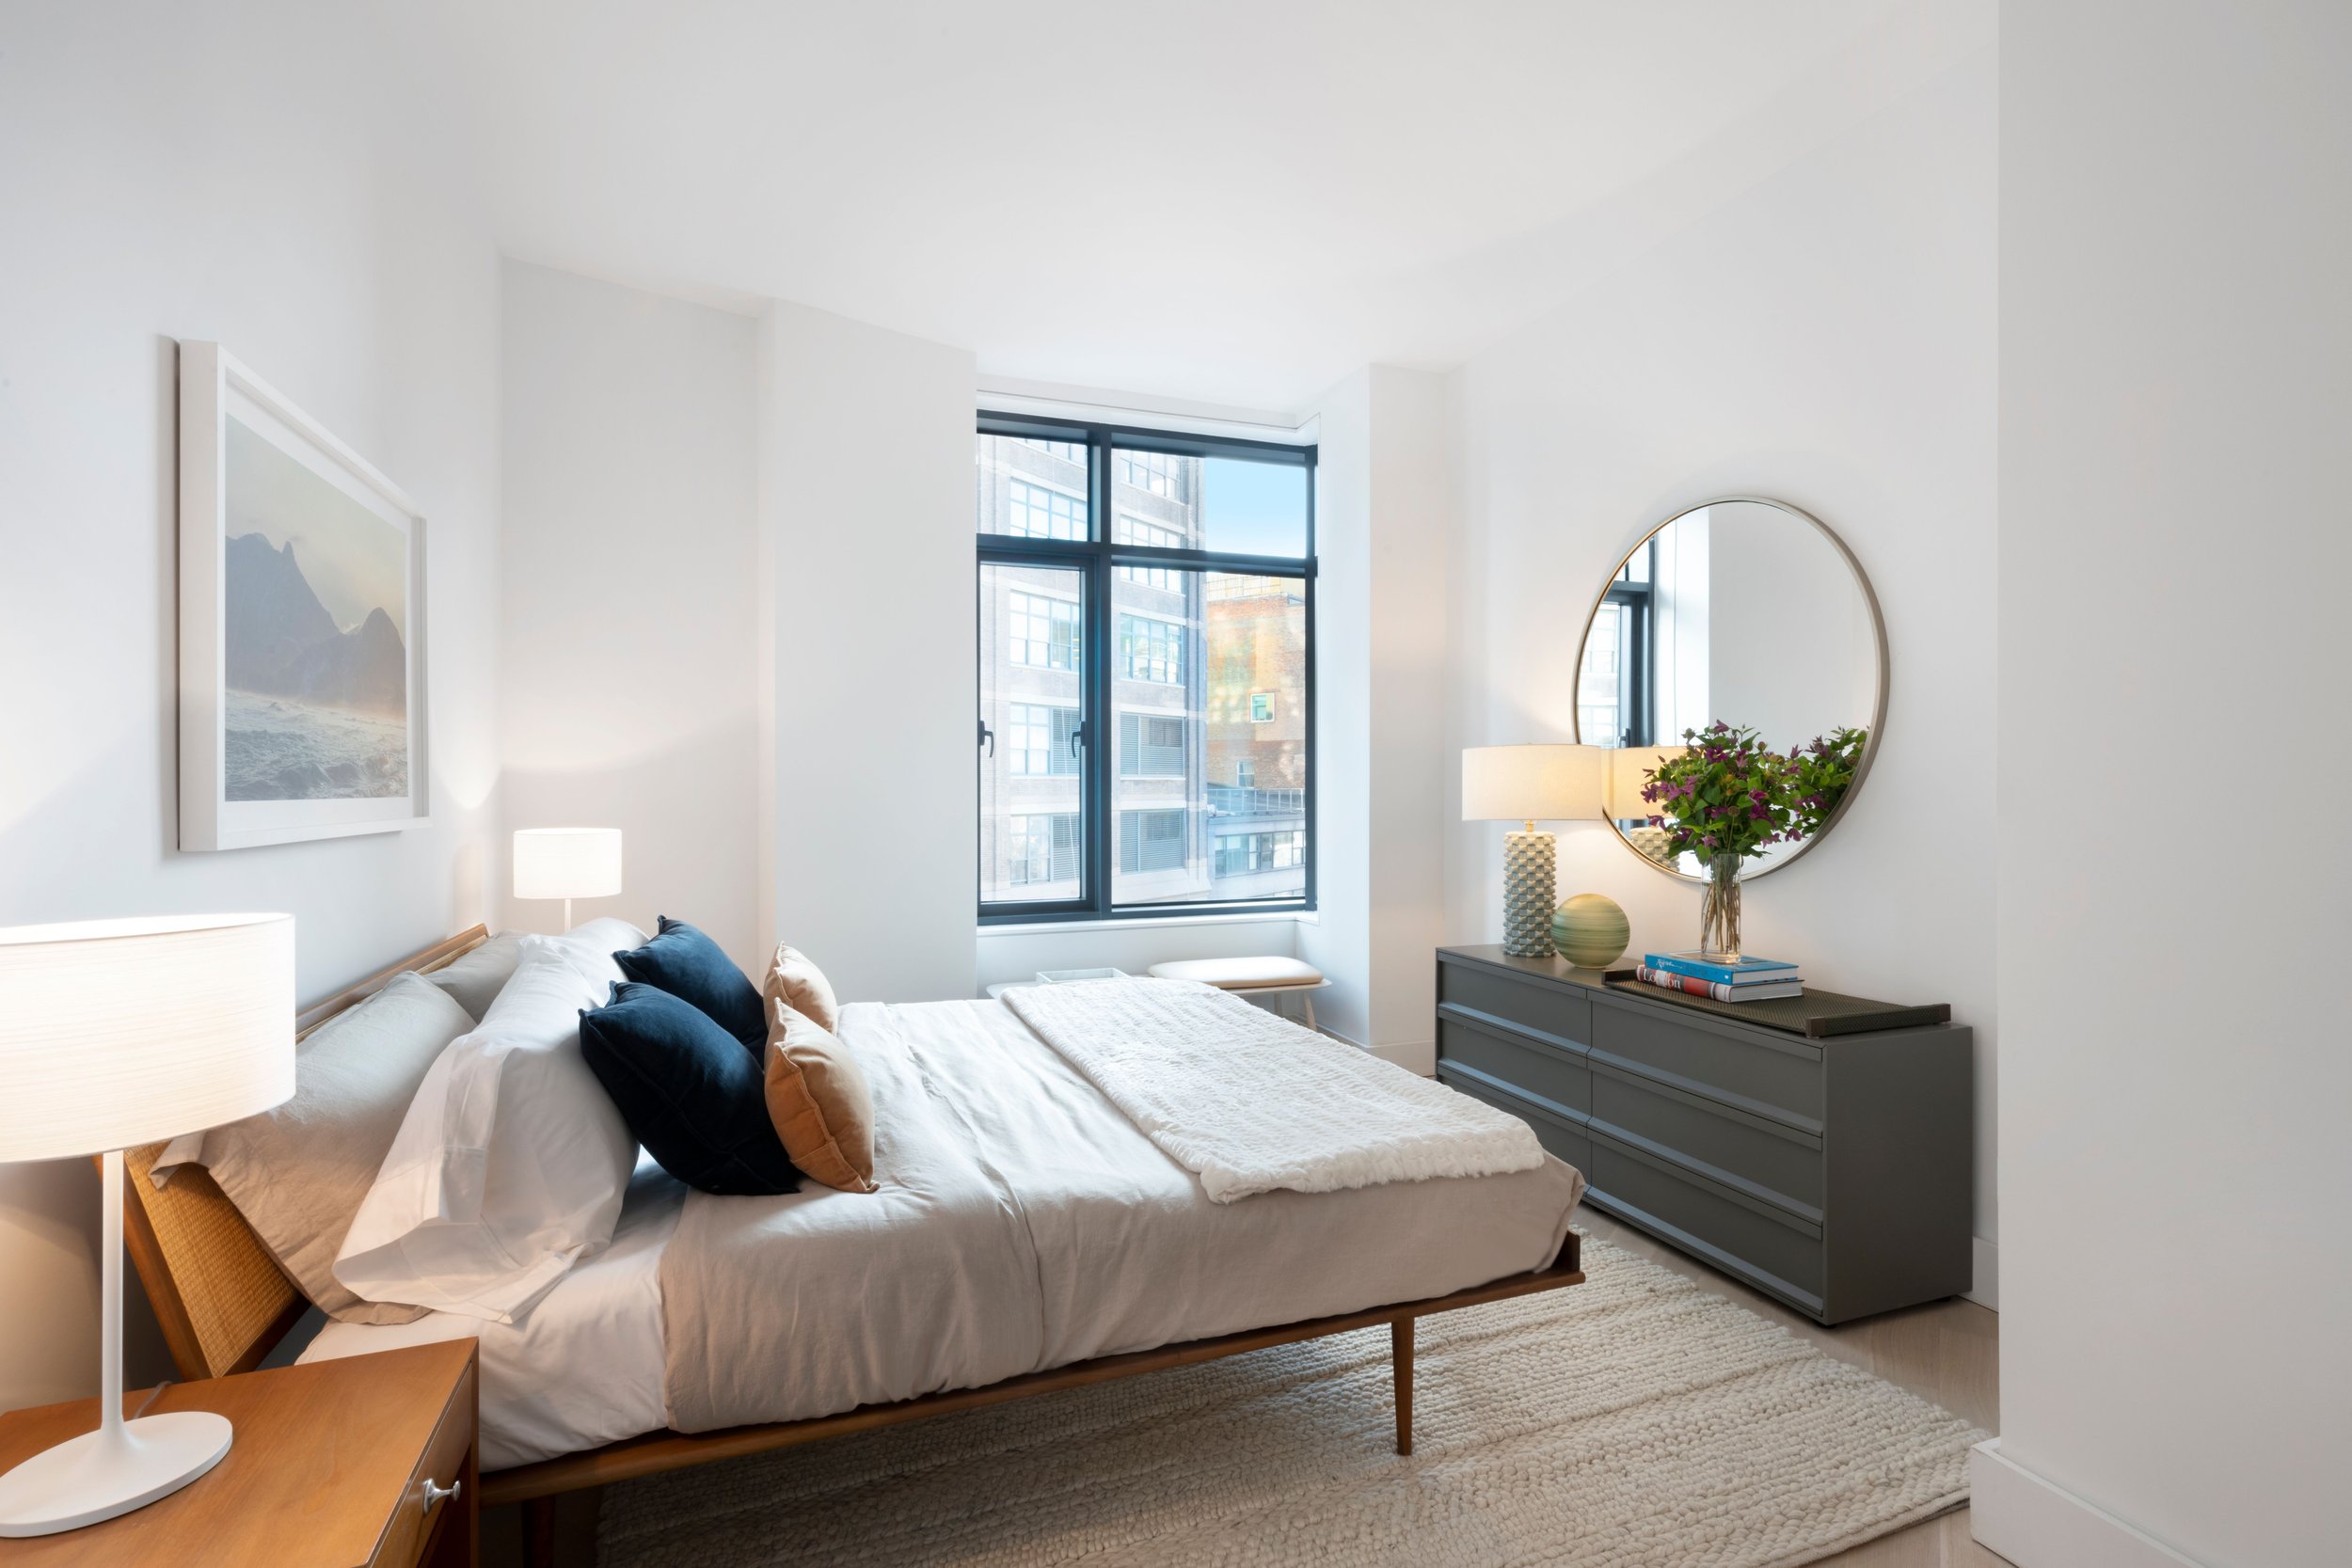  The Riverview offers 14 two-and-three-bedroom residences spanning interiors of 1,110 square feet to 2,011 square feet. The fenestration was created in such a way that the apartments have Hudson River and open city views. Eight of the units have priv